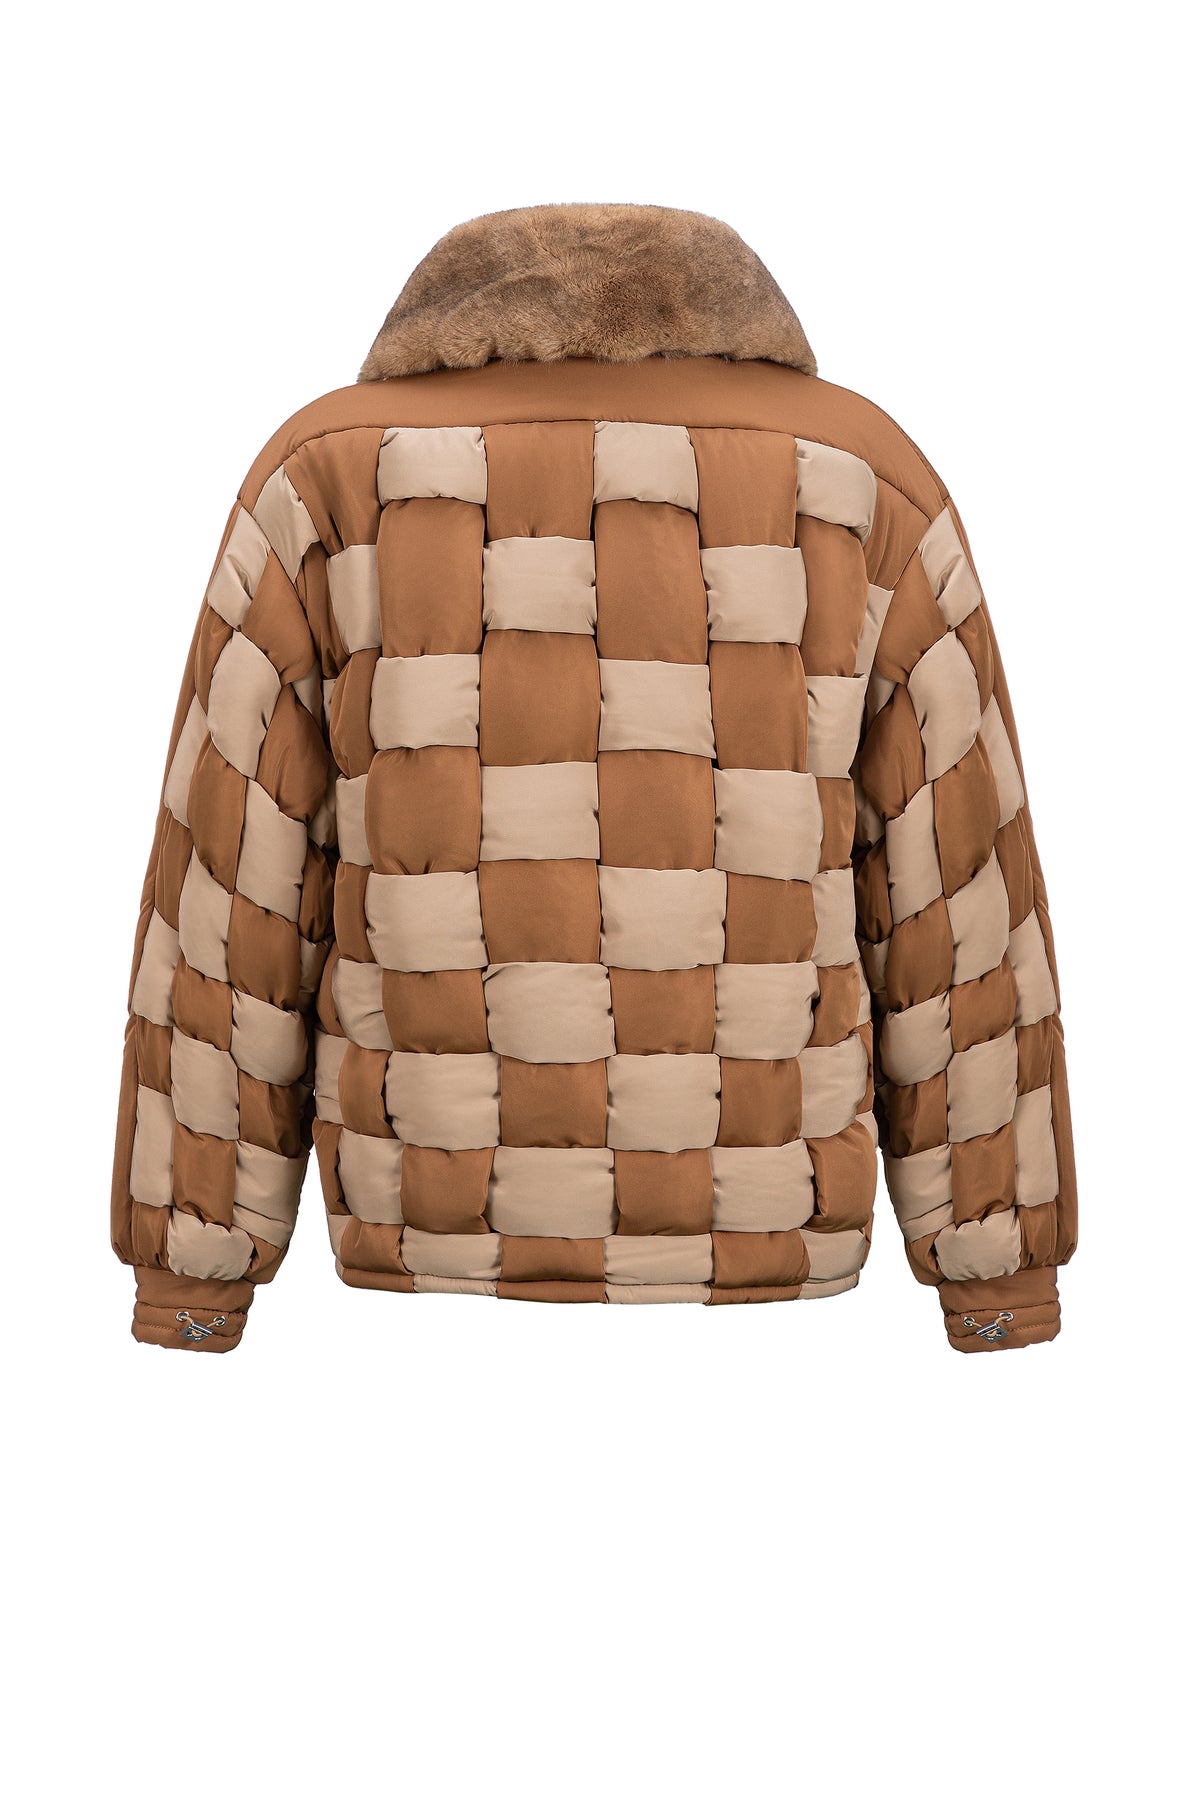 Bomber jacket in Sand/Brown